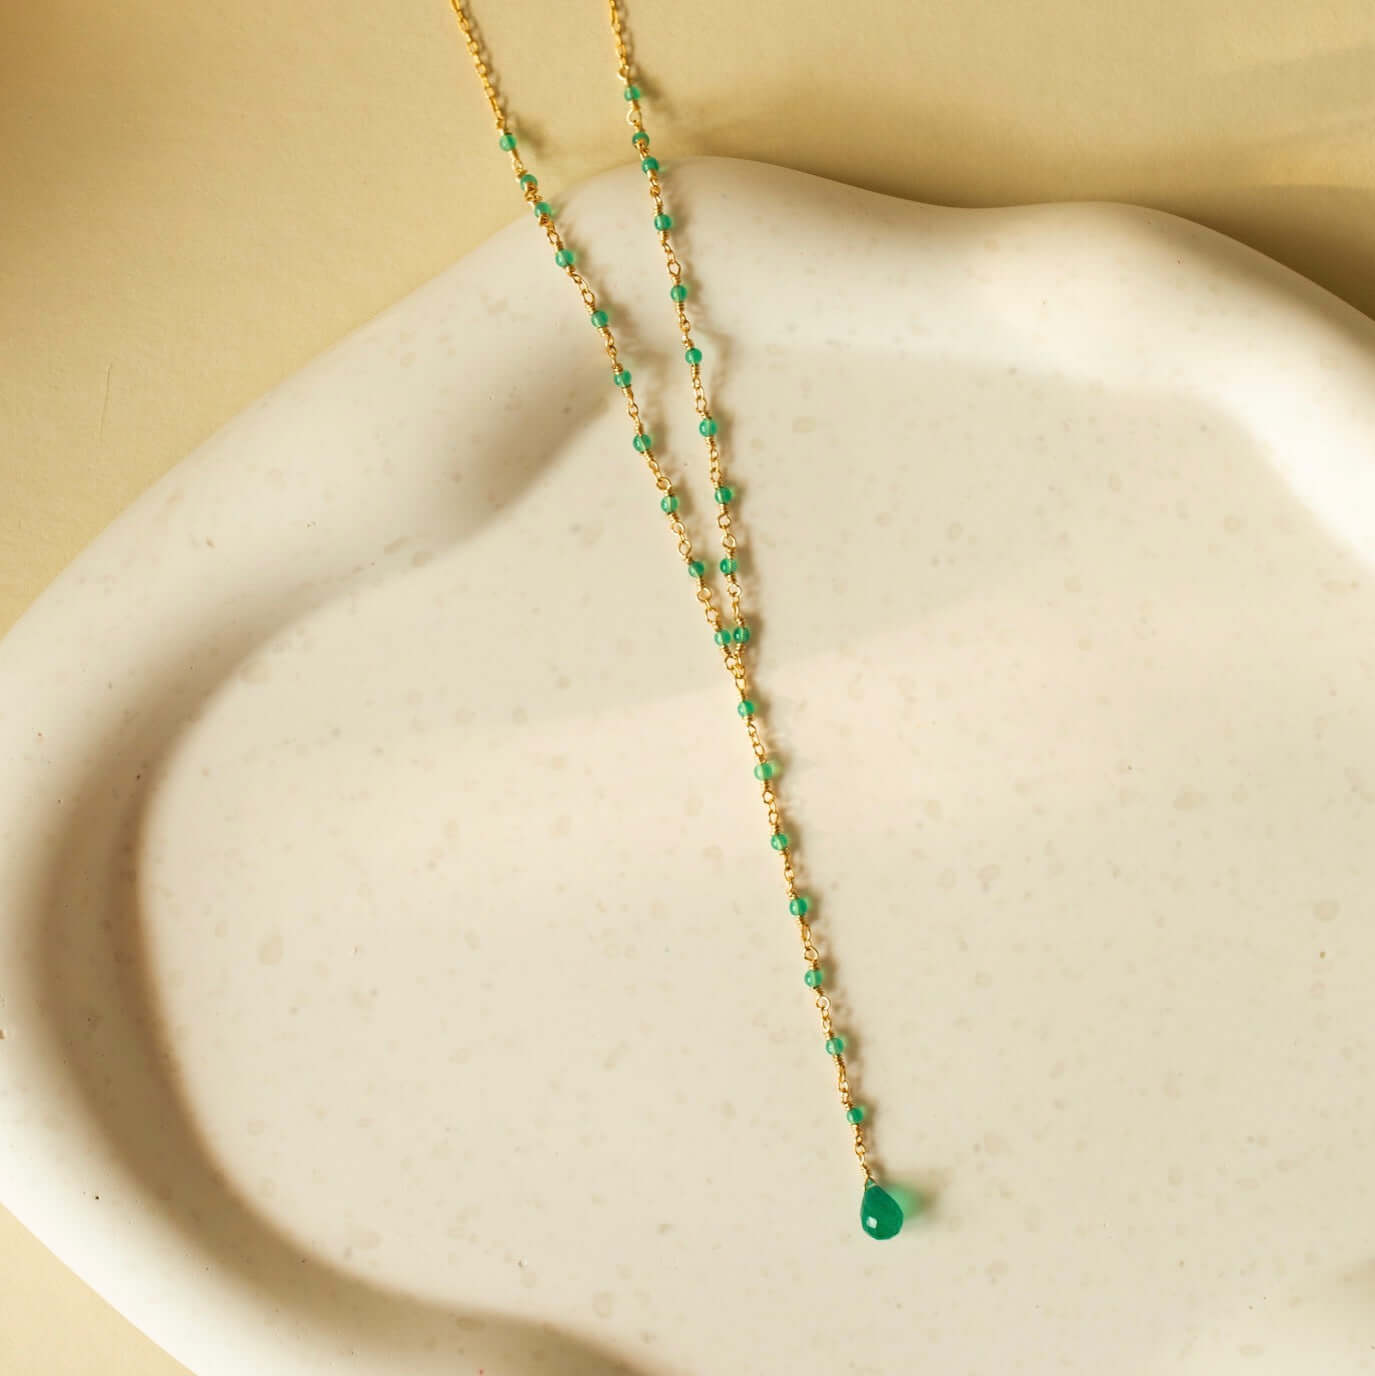 Green onyx necklace on clay—natural beauty, easy and captivating.